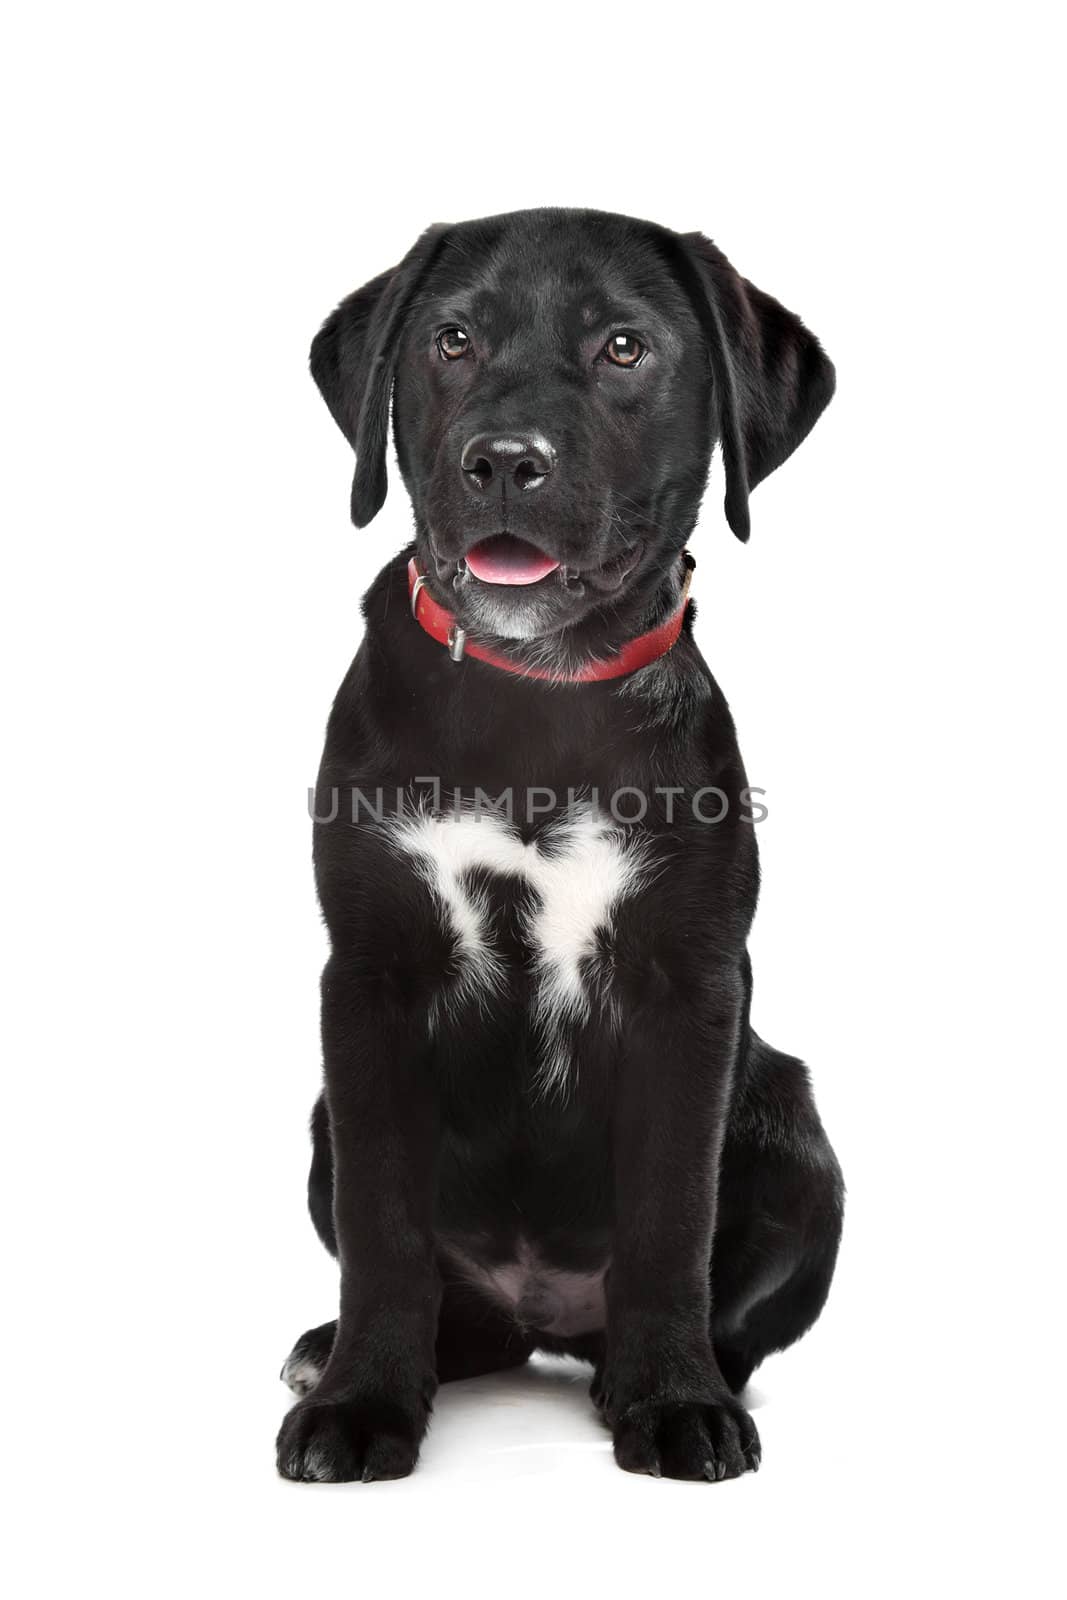 Black Labrador puppy in front of a white background